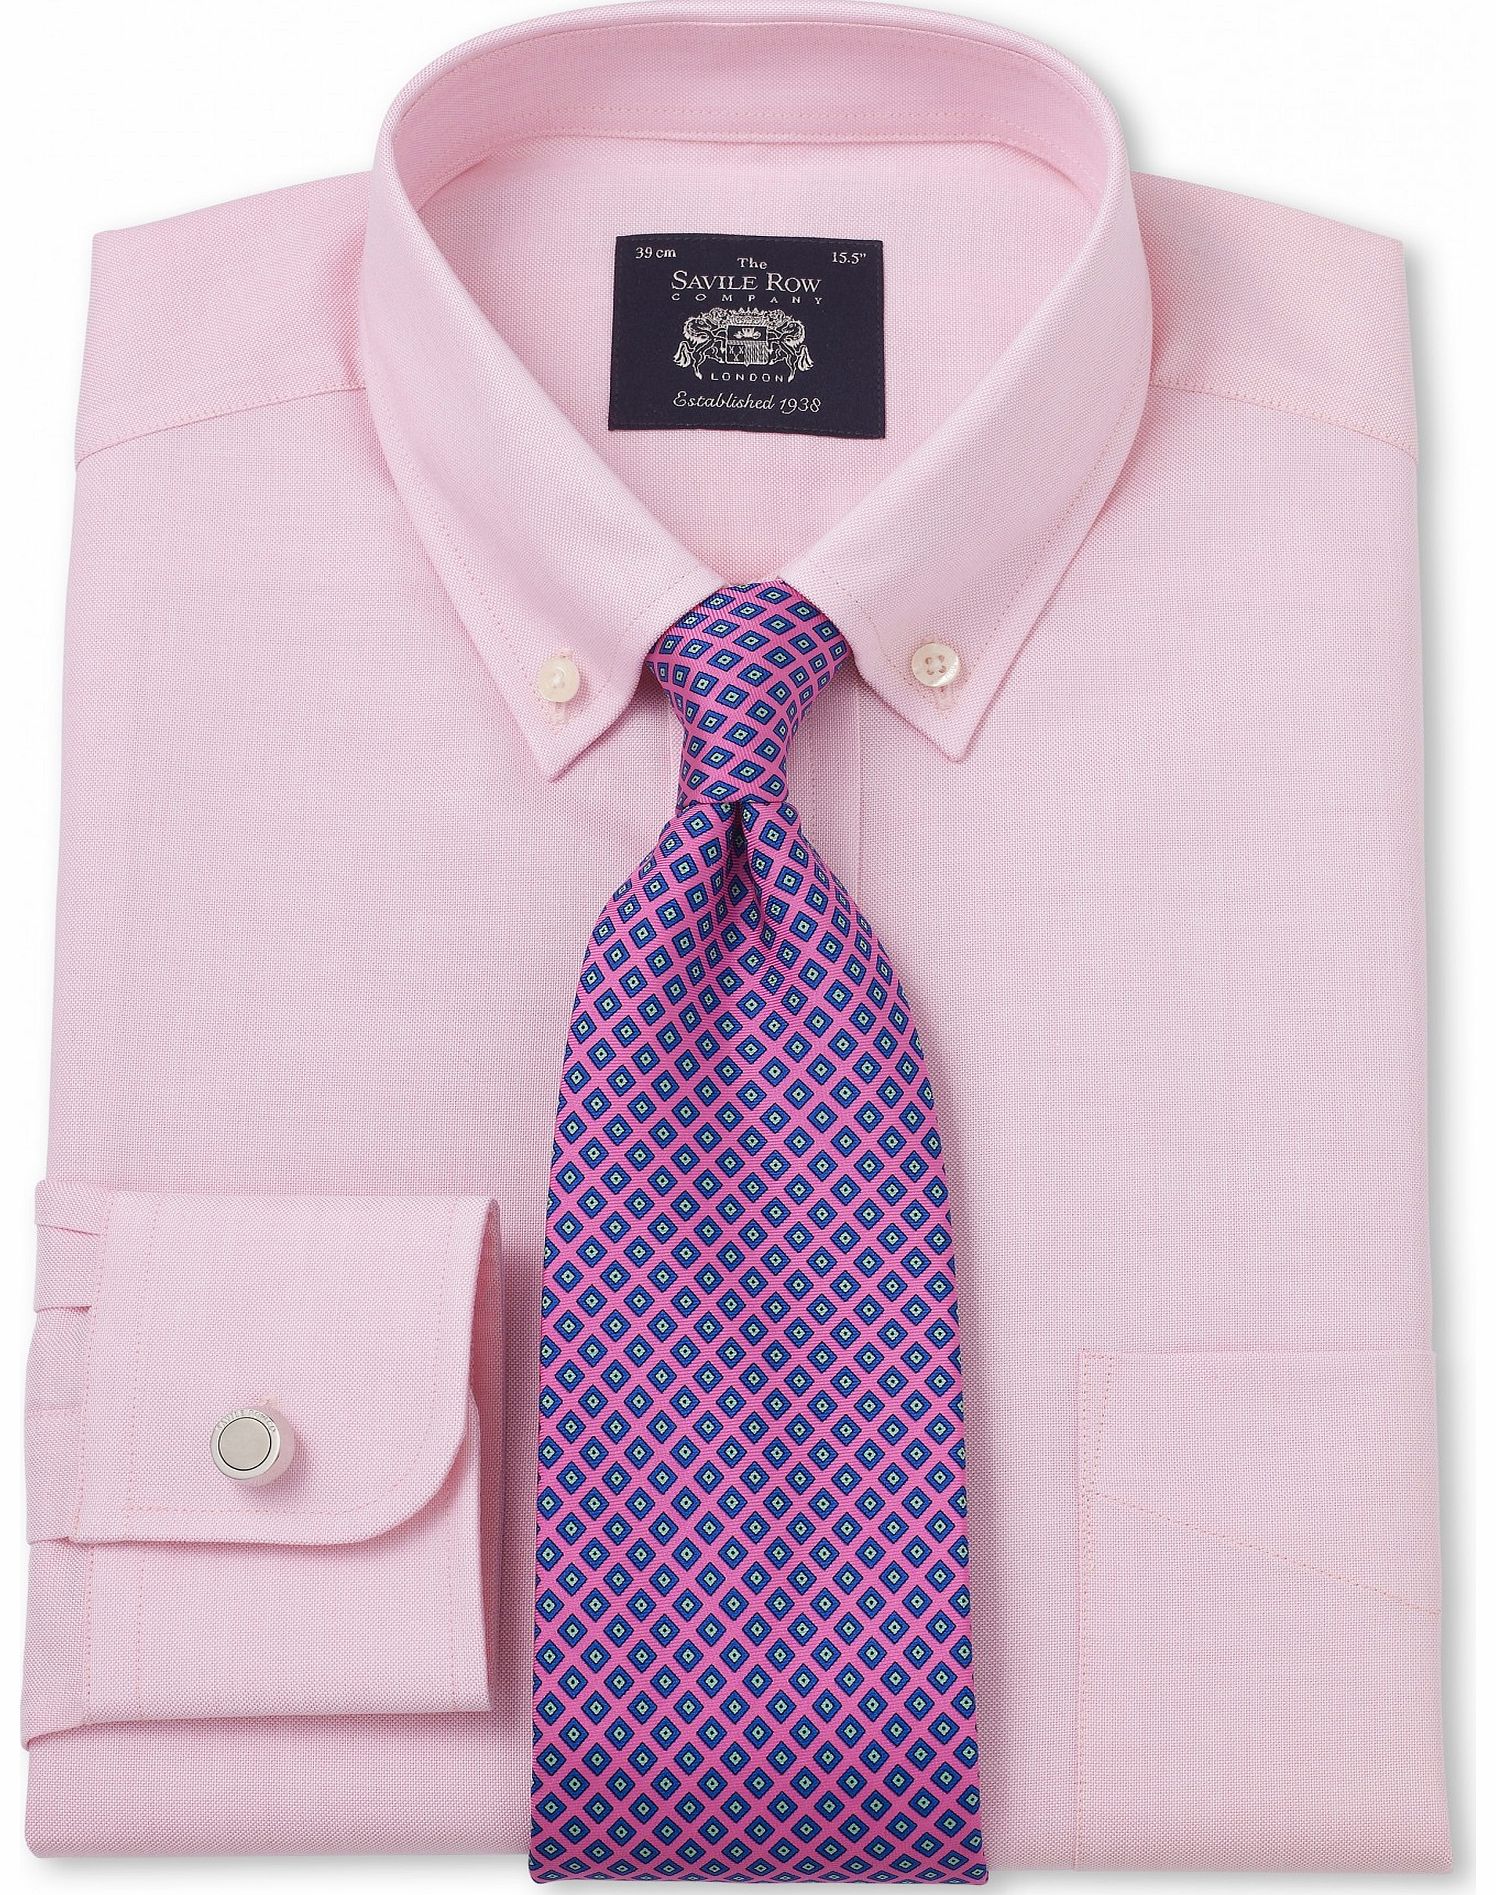 Savile Row Company Pink Pinpoint Classic Fit Shirt 16`` Lengthened